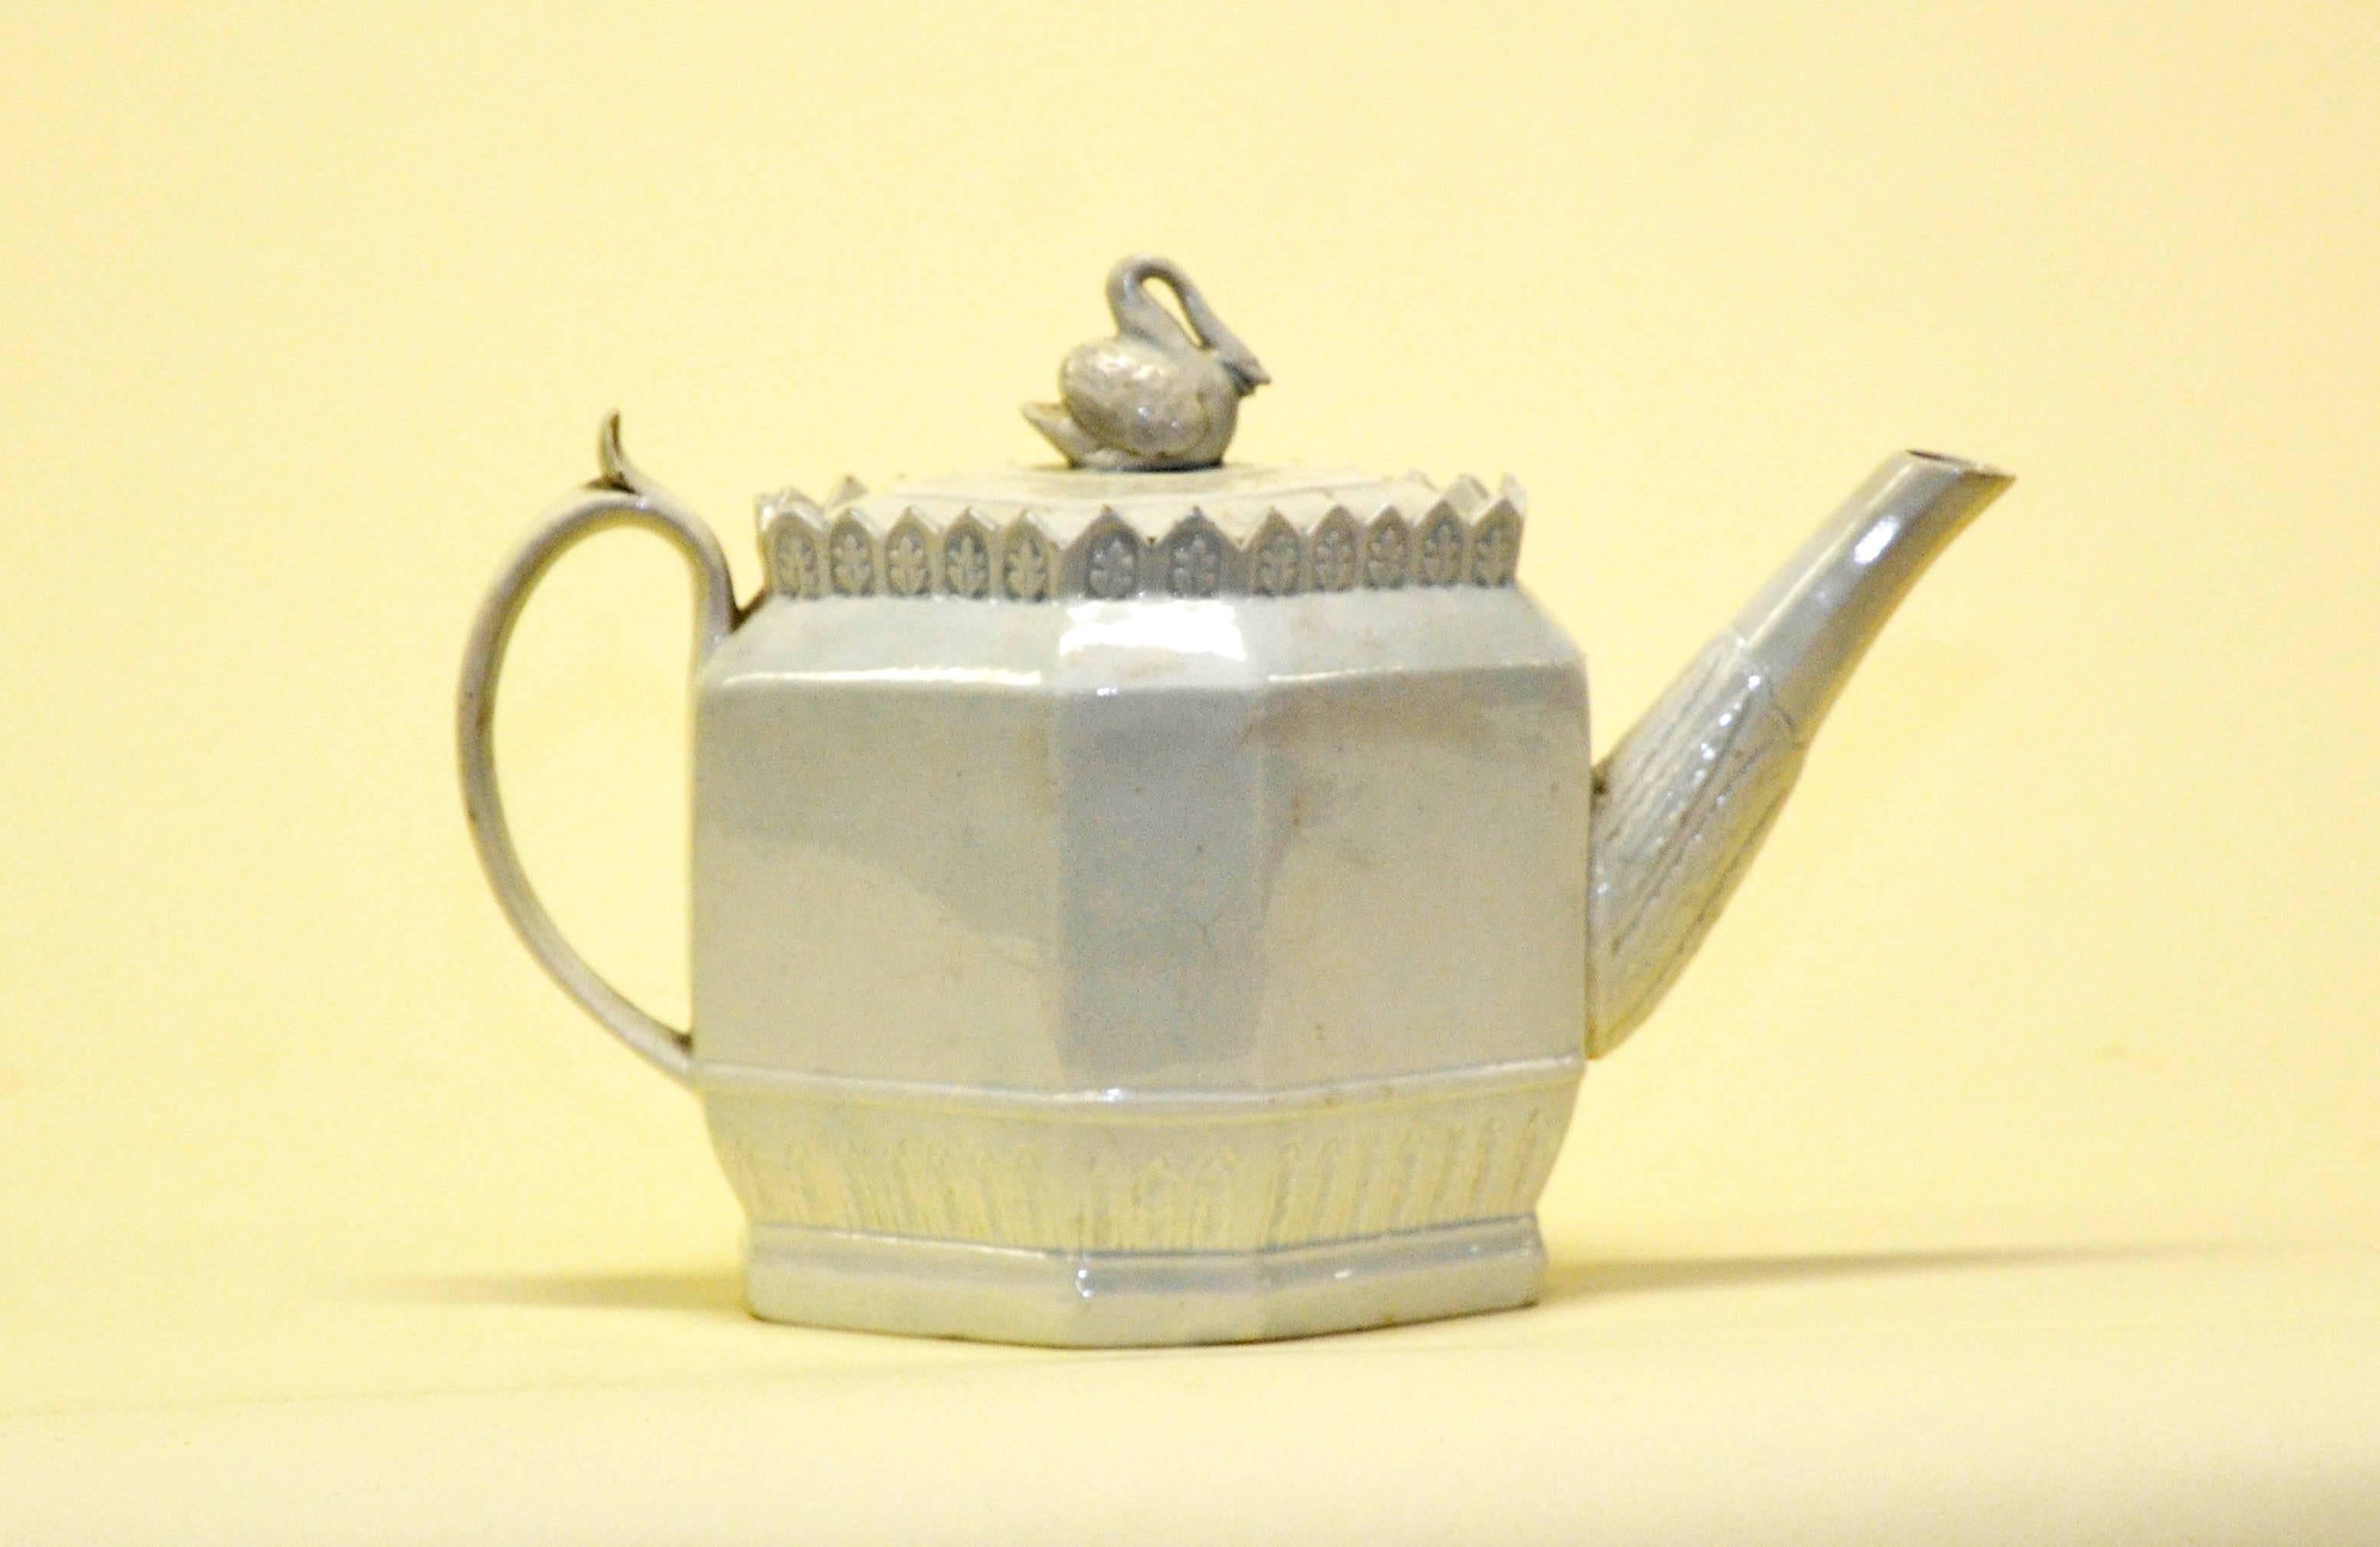 Early 1800 English possibly Thomas Harley creamware octagonal lead-glazed earthenware teapot with swan finial.

Swan finial has been restored.